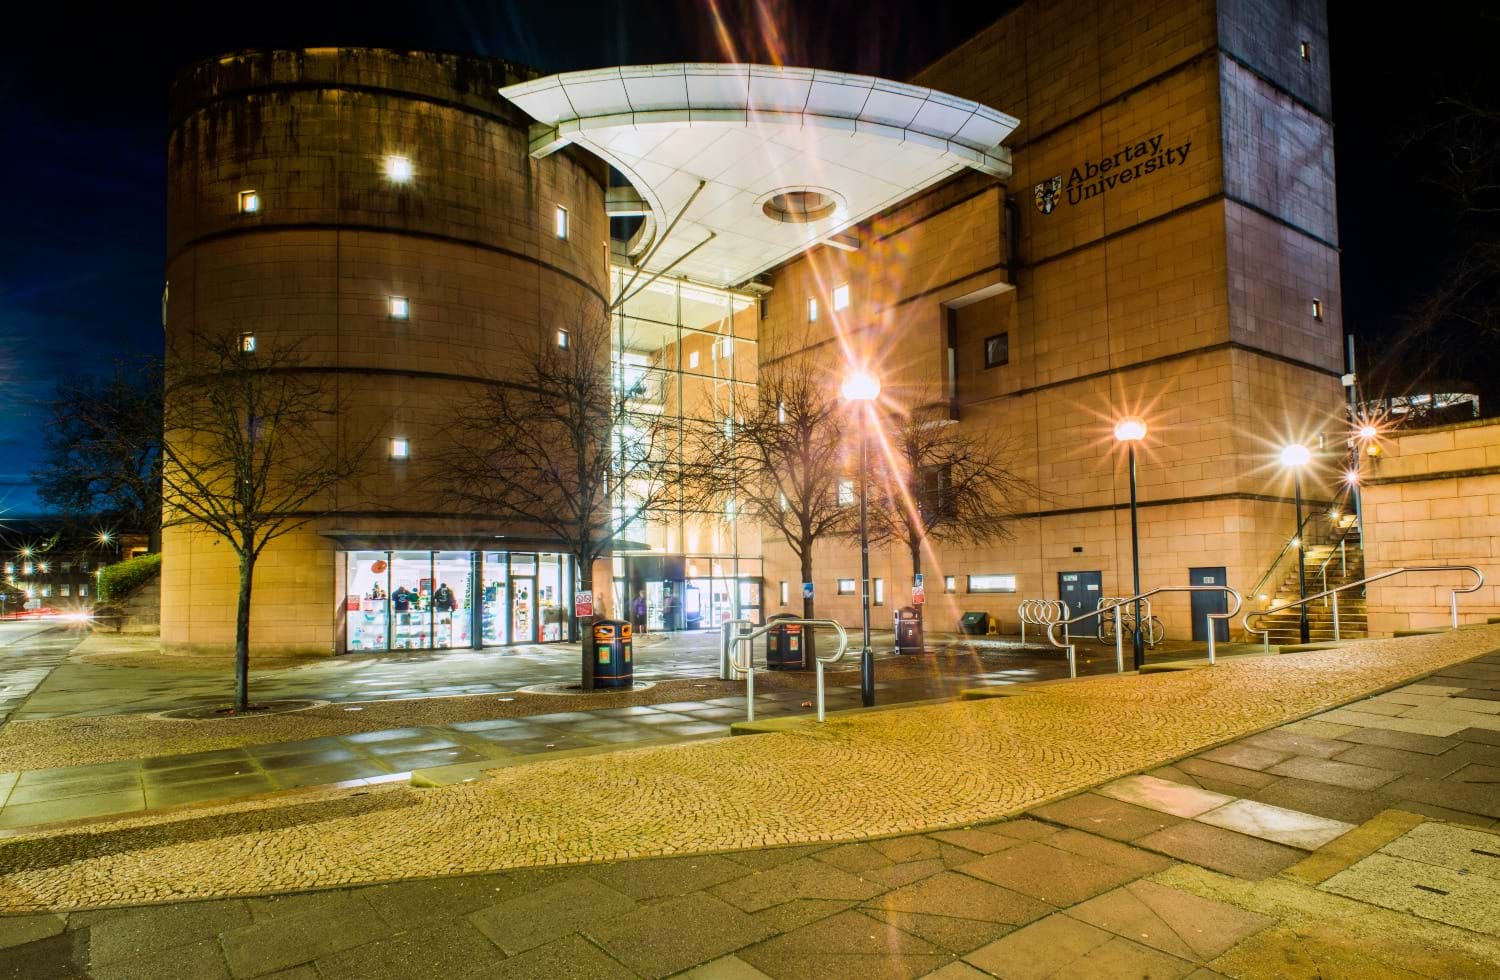 The Abertay Library at night